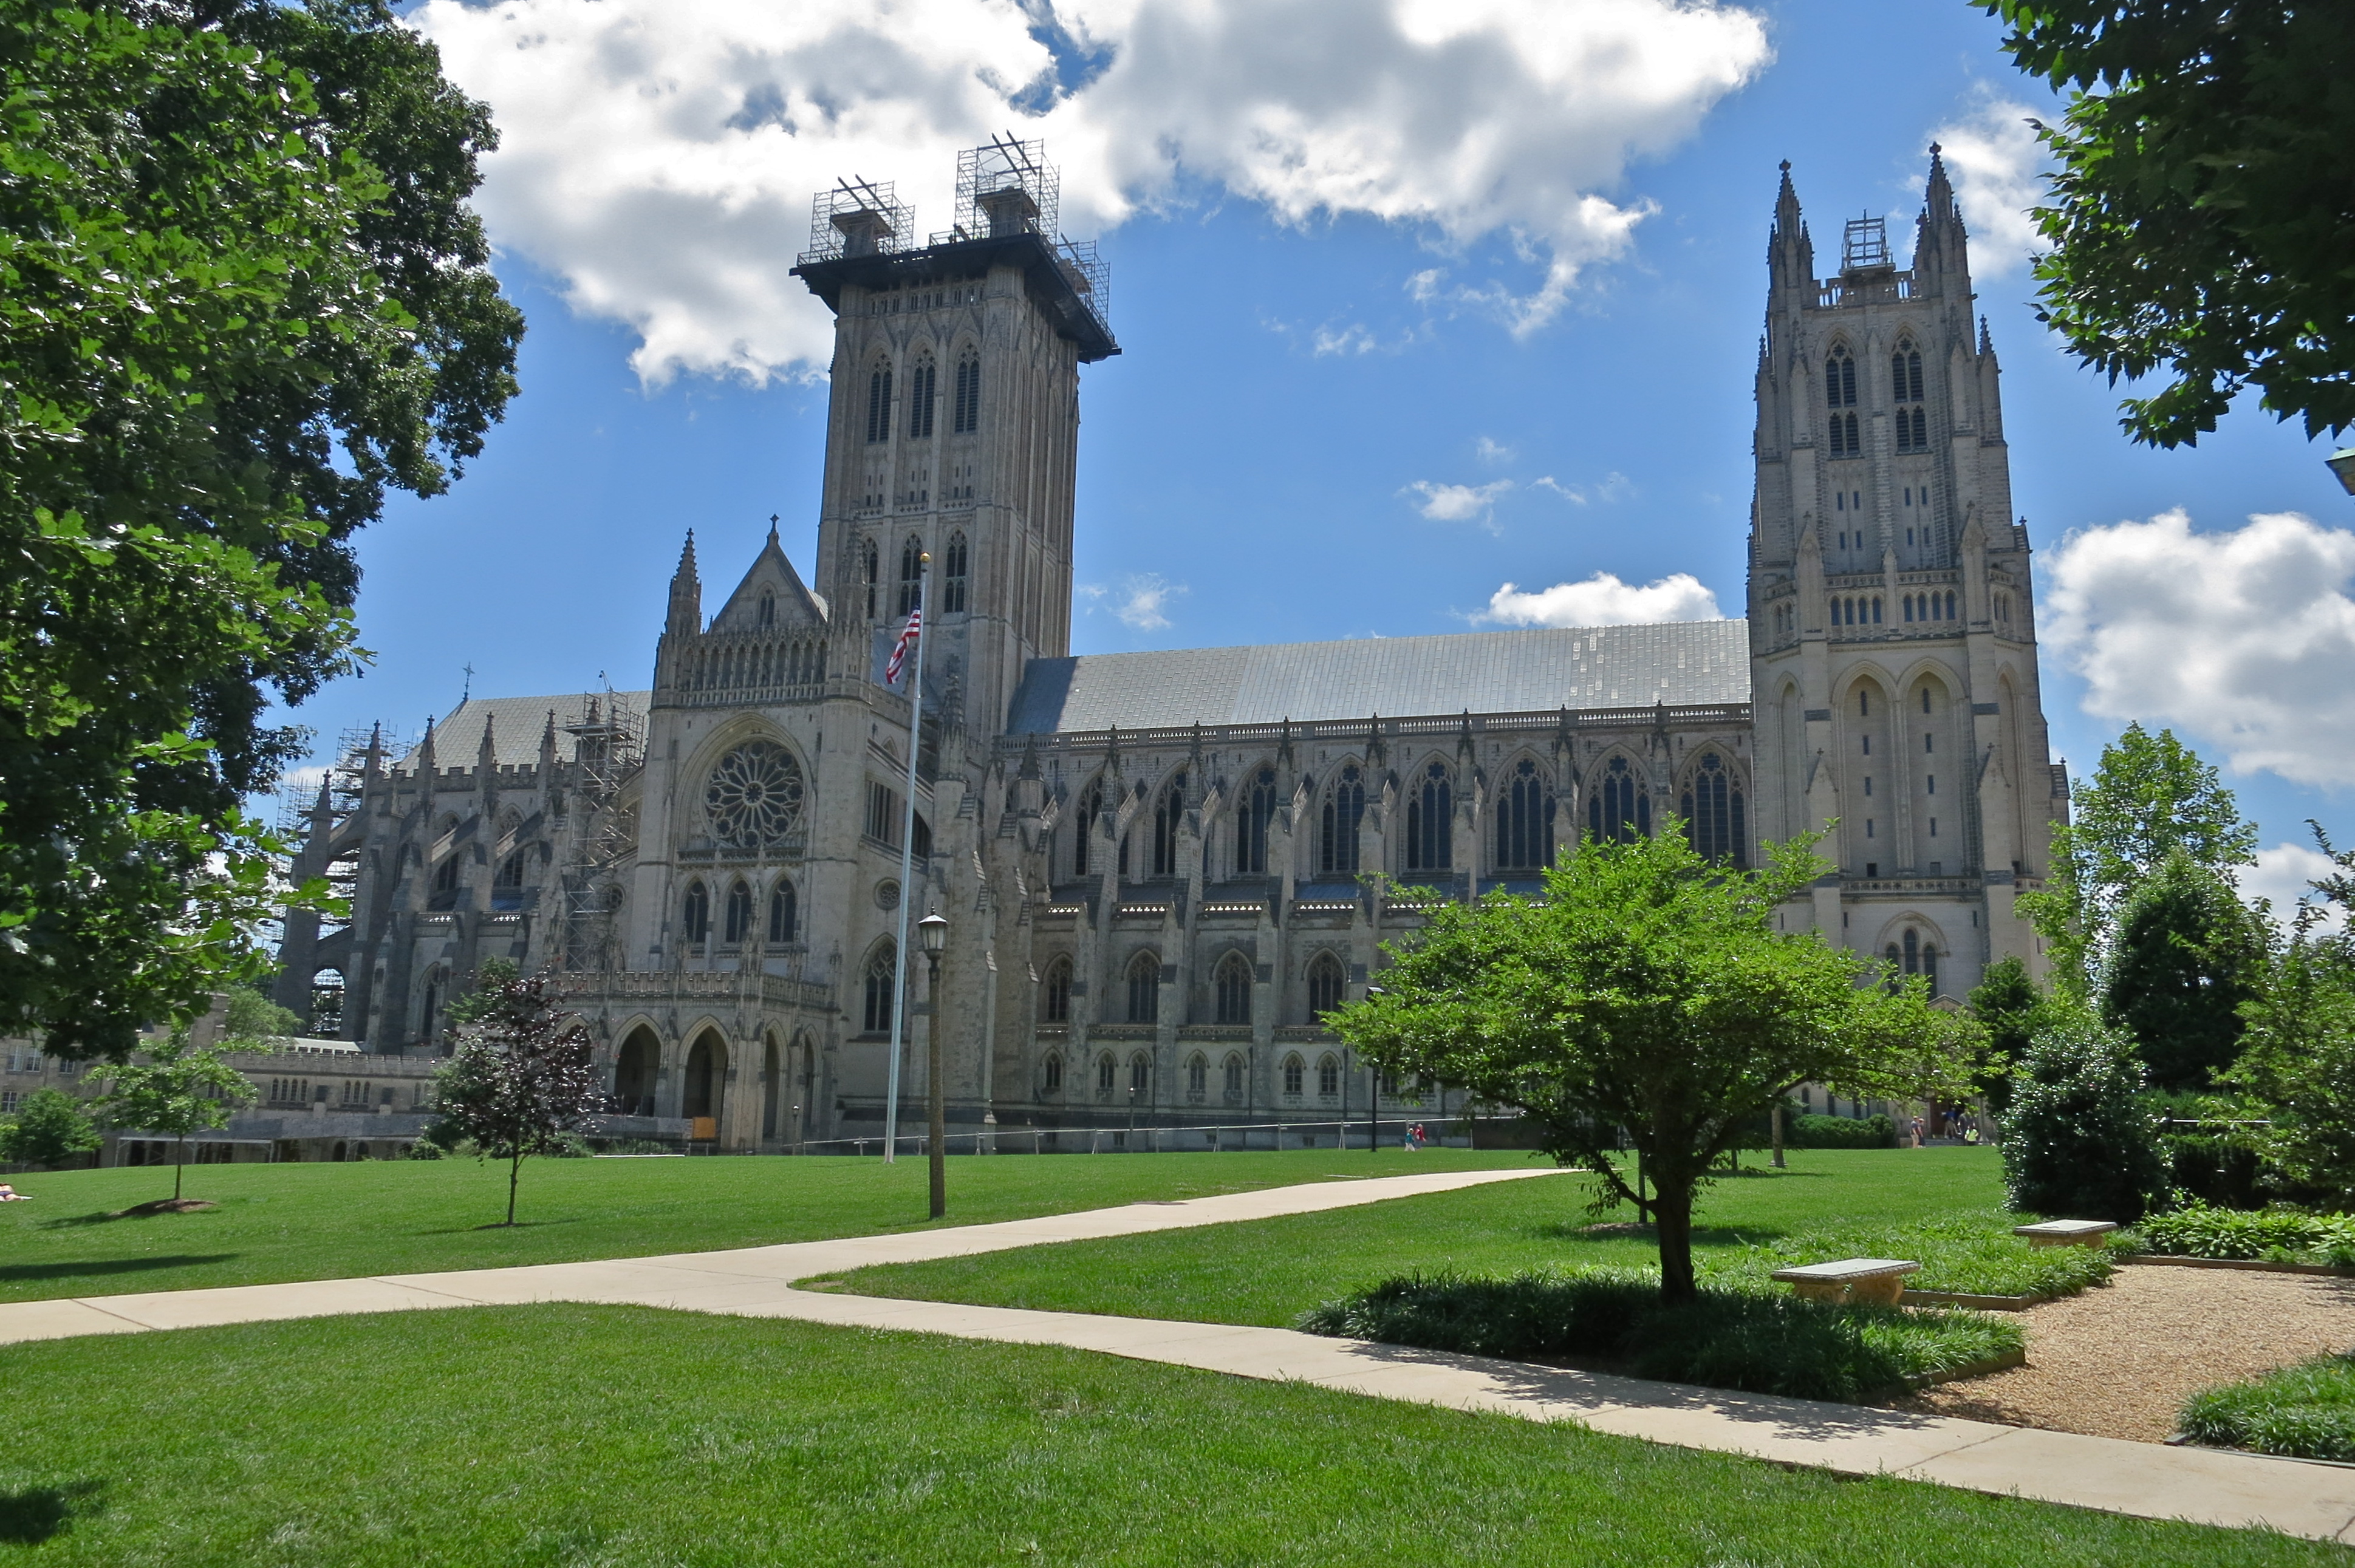 What are some interesting facts about the Washington National Cathedral?